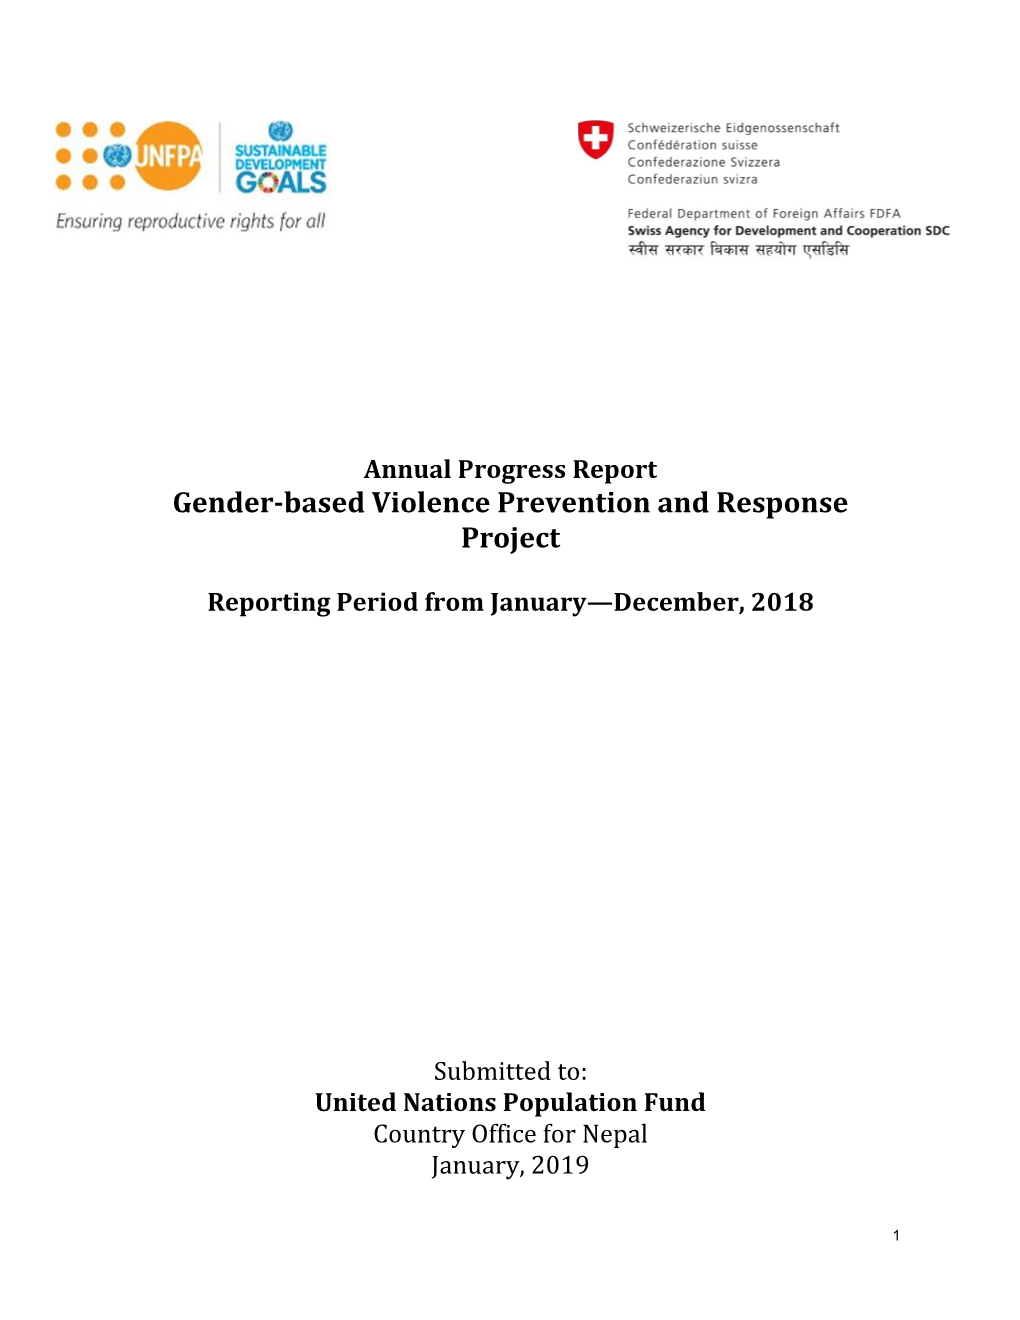 Gender-Based Violence Prevention and Response Project